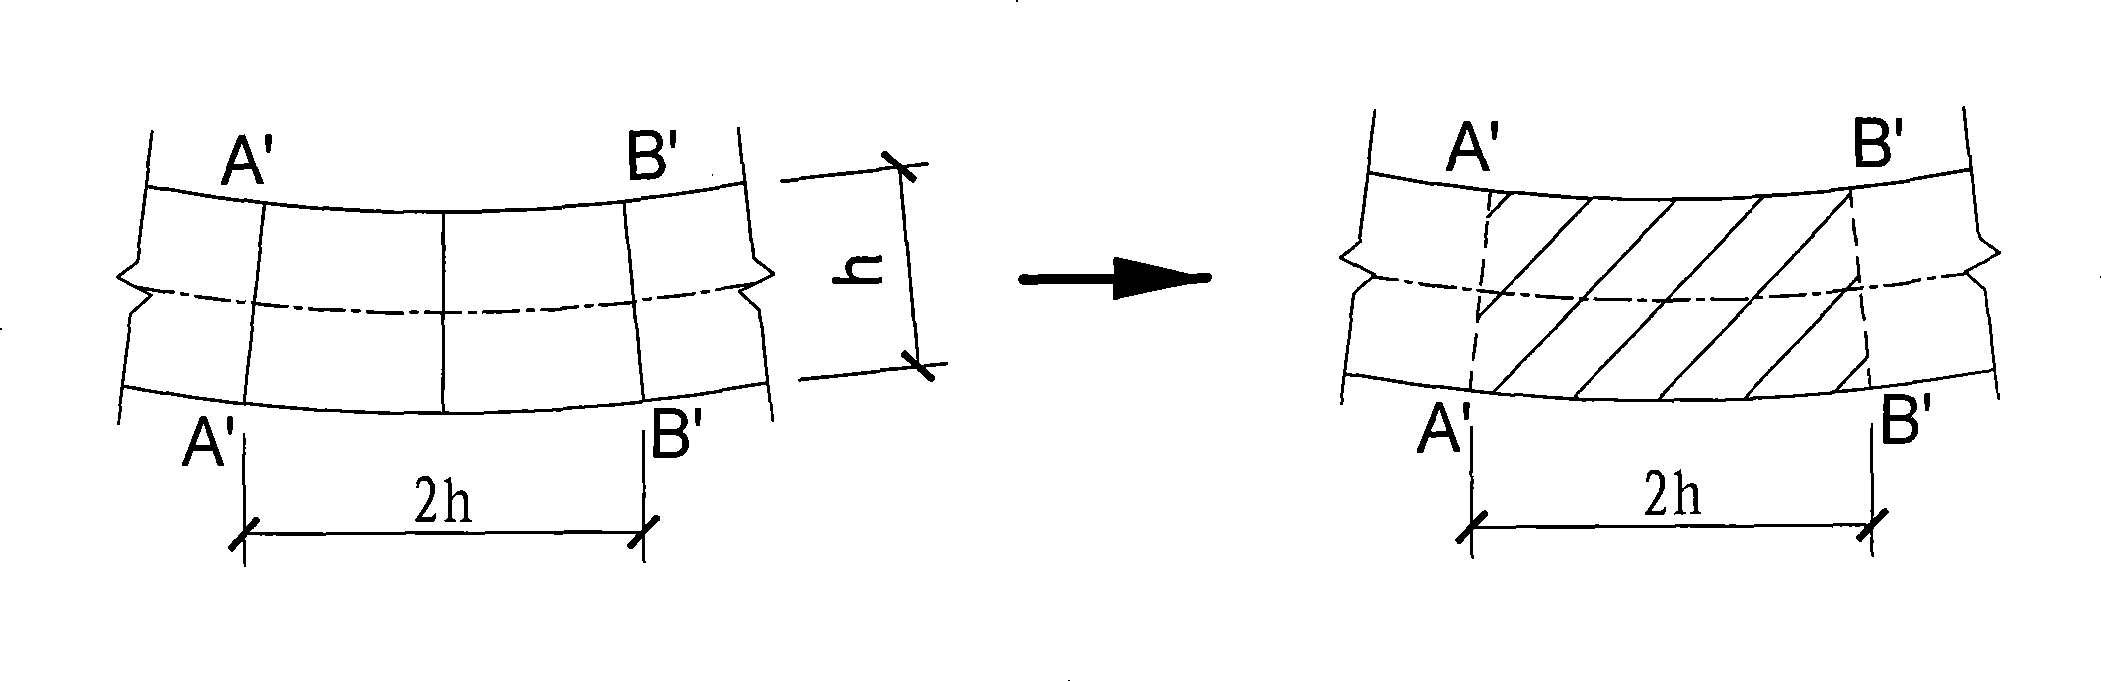 Pre-stress lining design method for shield tunnel